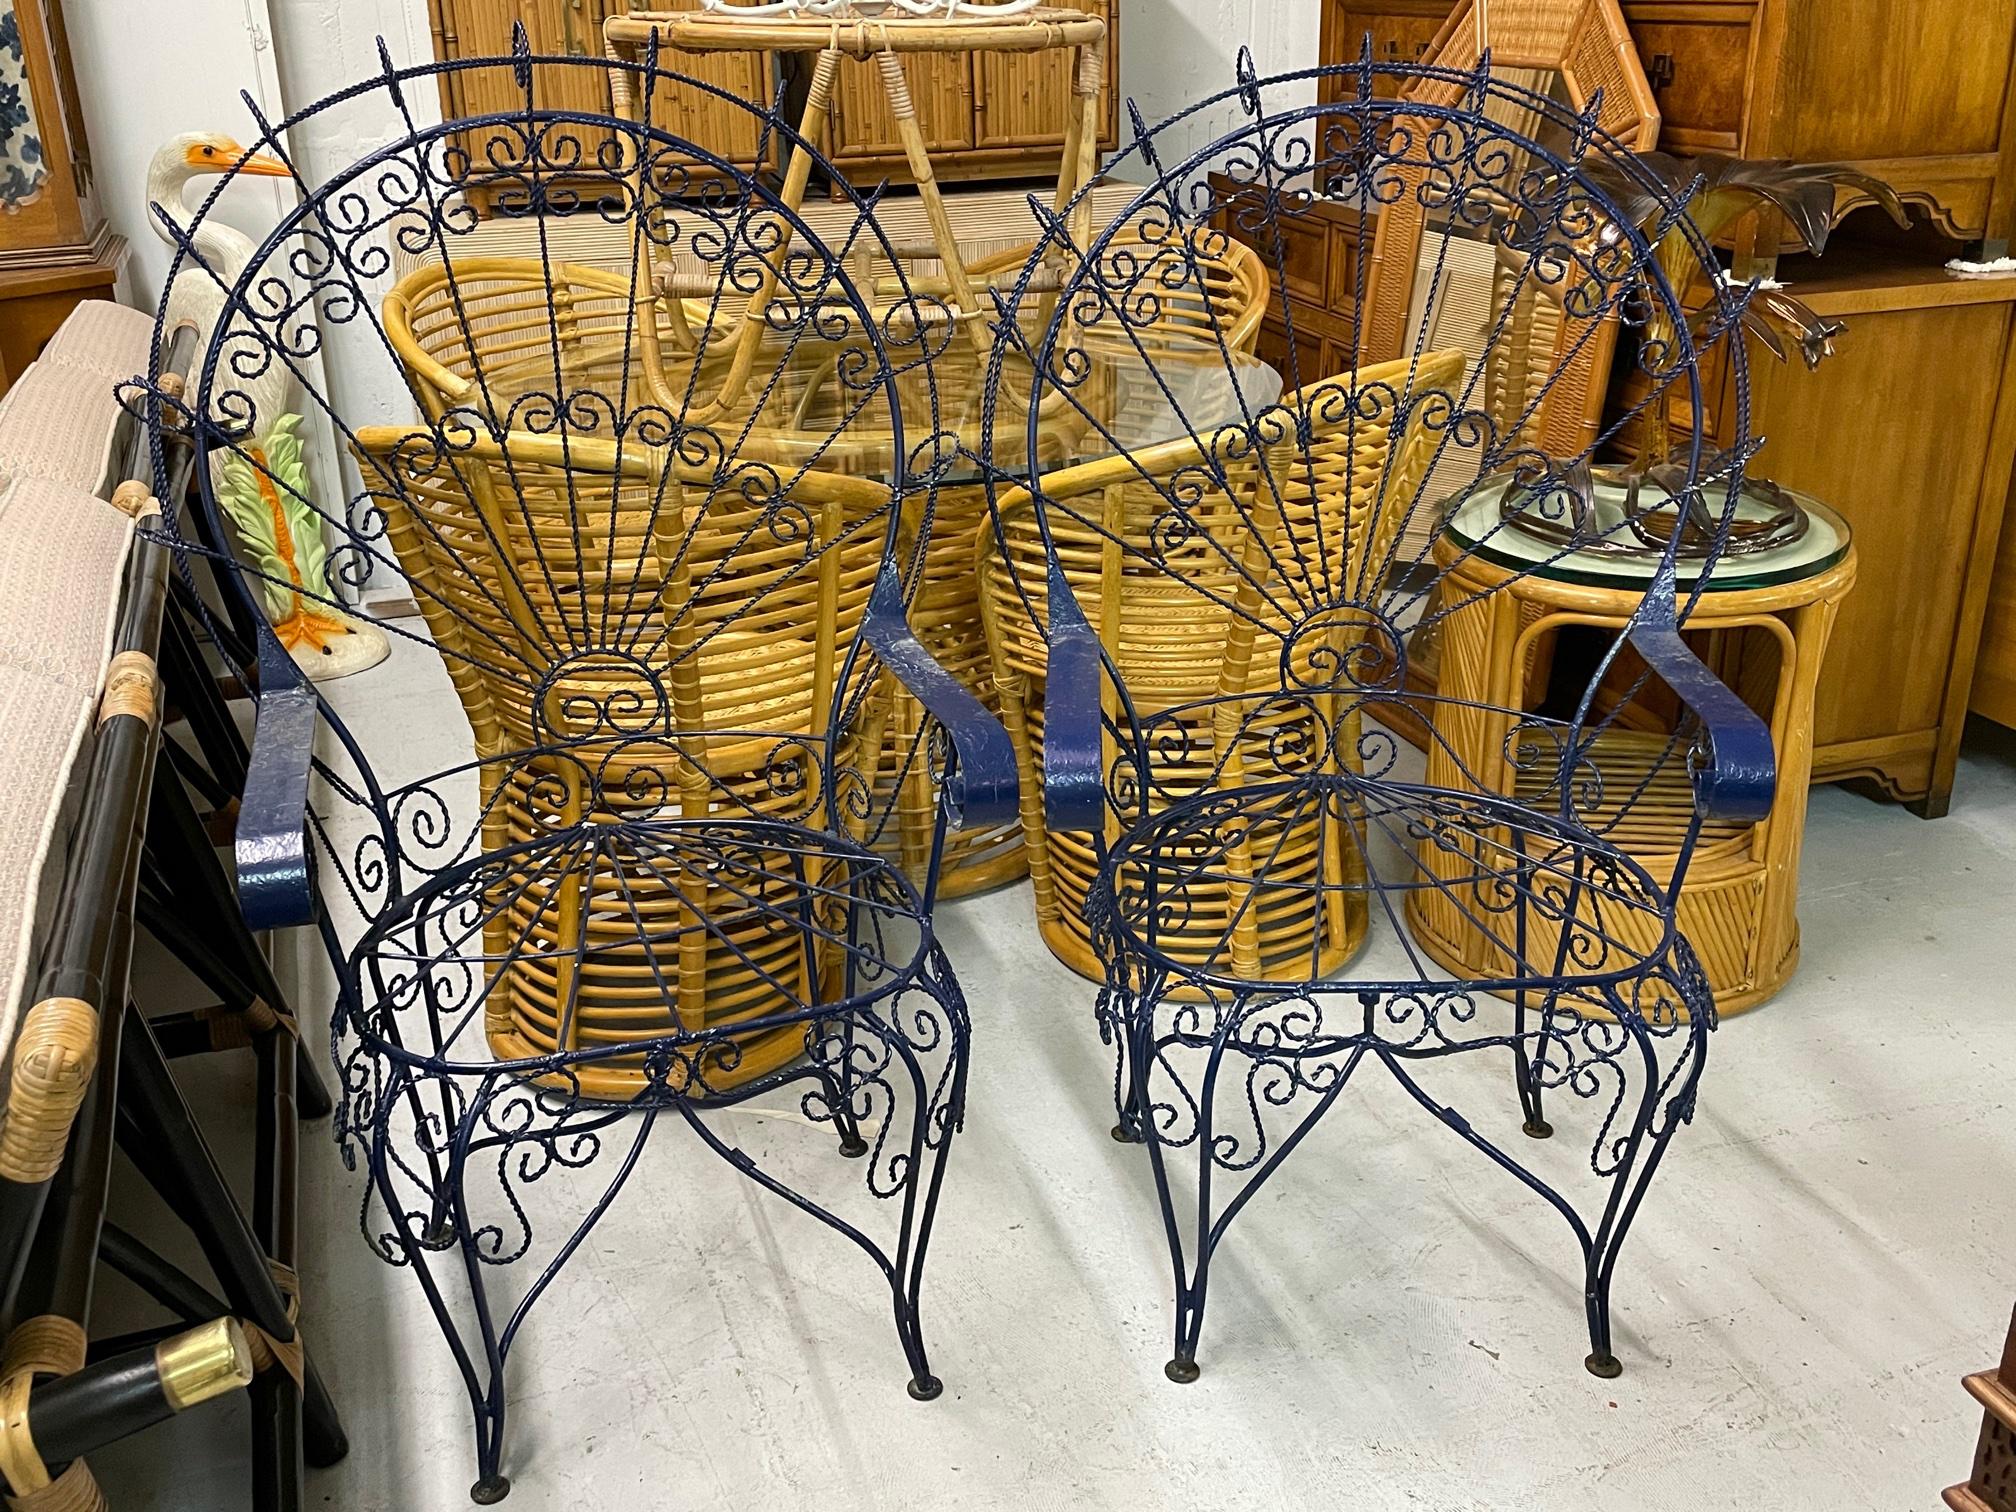 Set of two wrought iron peacock garden chairs by Salterini feature large fan backs and a twisted wire frame. Decorative scroll detailing in this Victorian style chair. Good condition with imperfections consistent with age. Nice patina throughout.